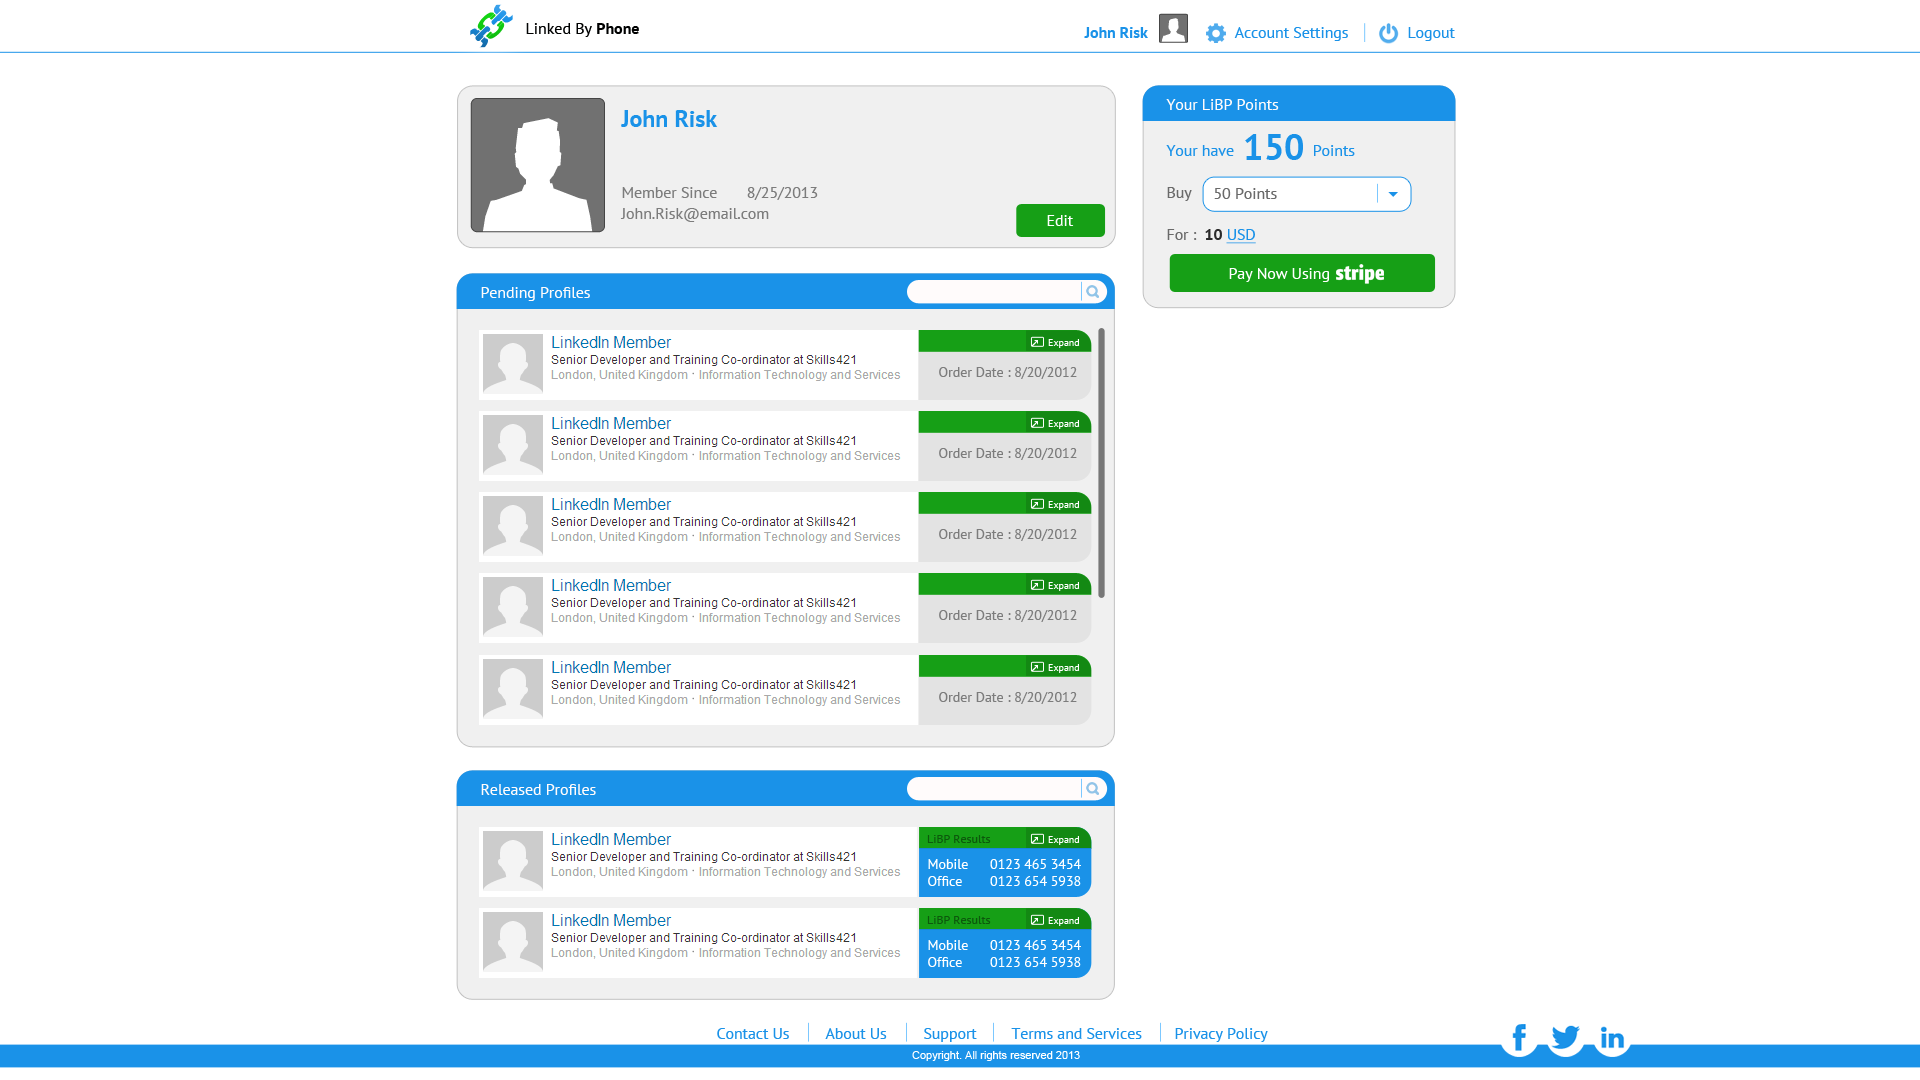 Linked by phone customer view screen 2